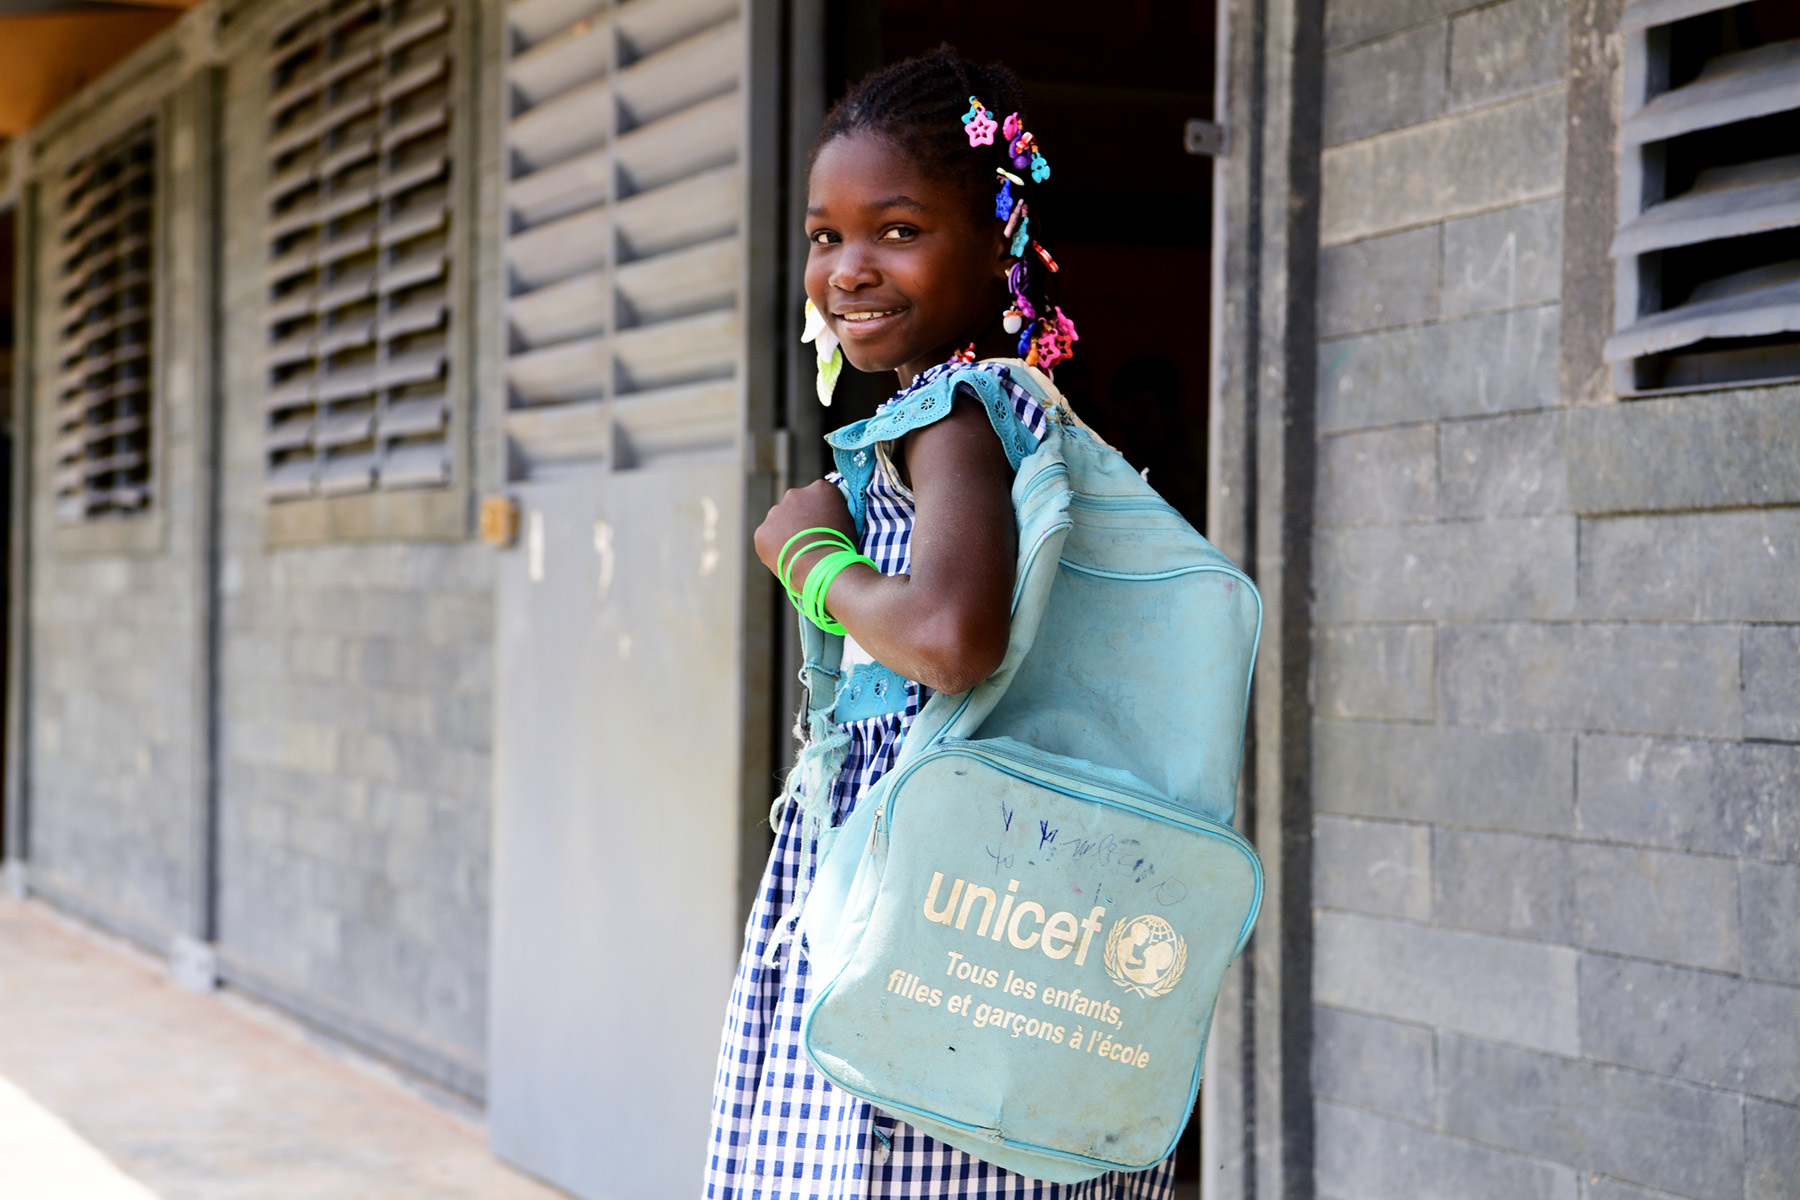 A schoolgirl walking into school, turns her head smiling back at the camera, while wearing a blue UNICEF backpack.